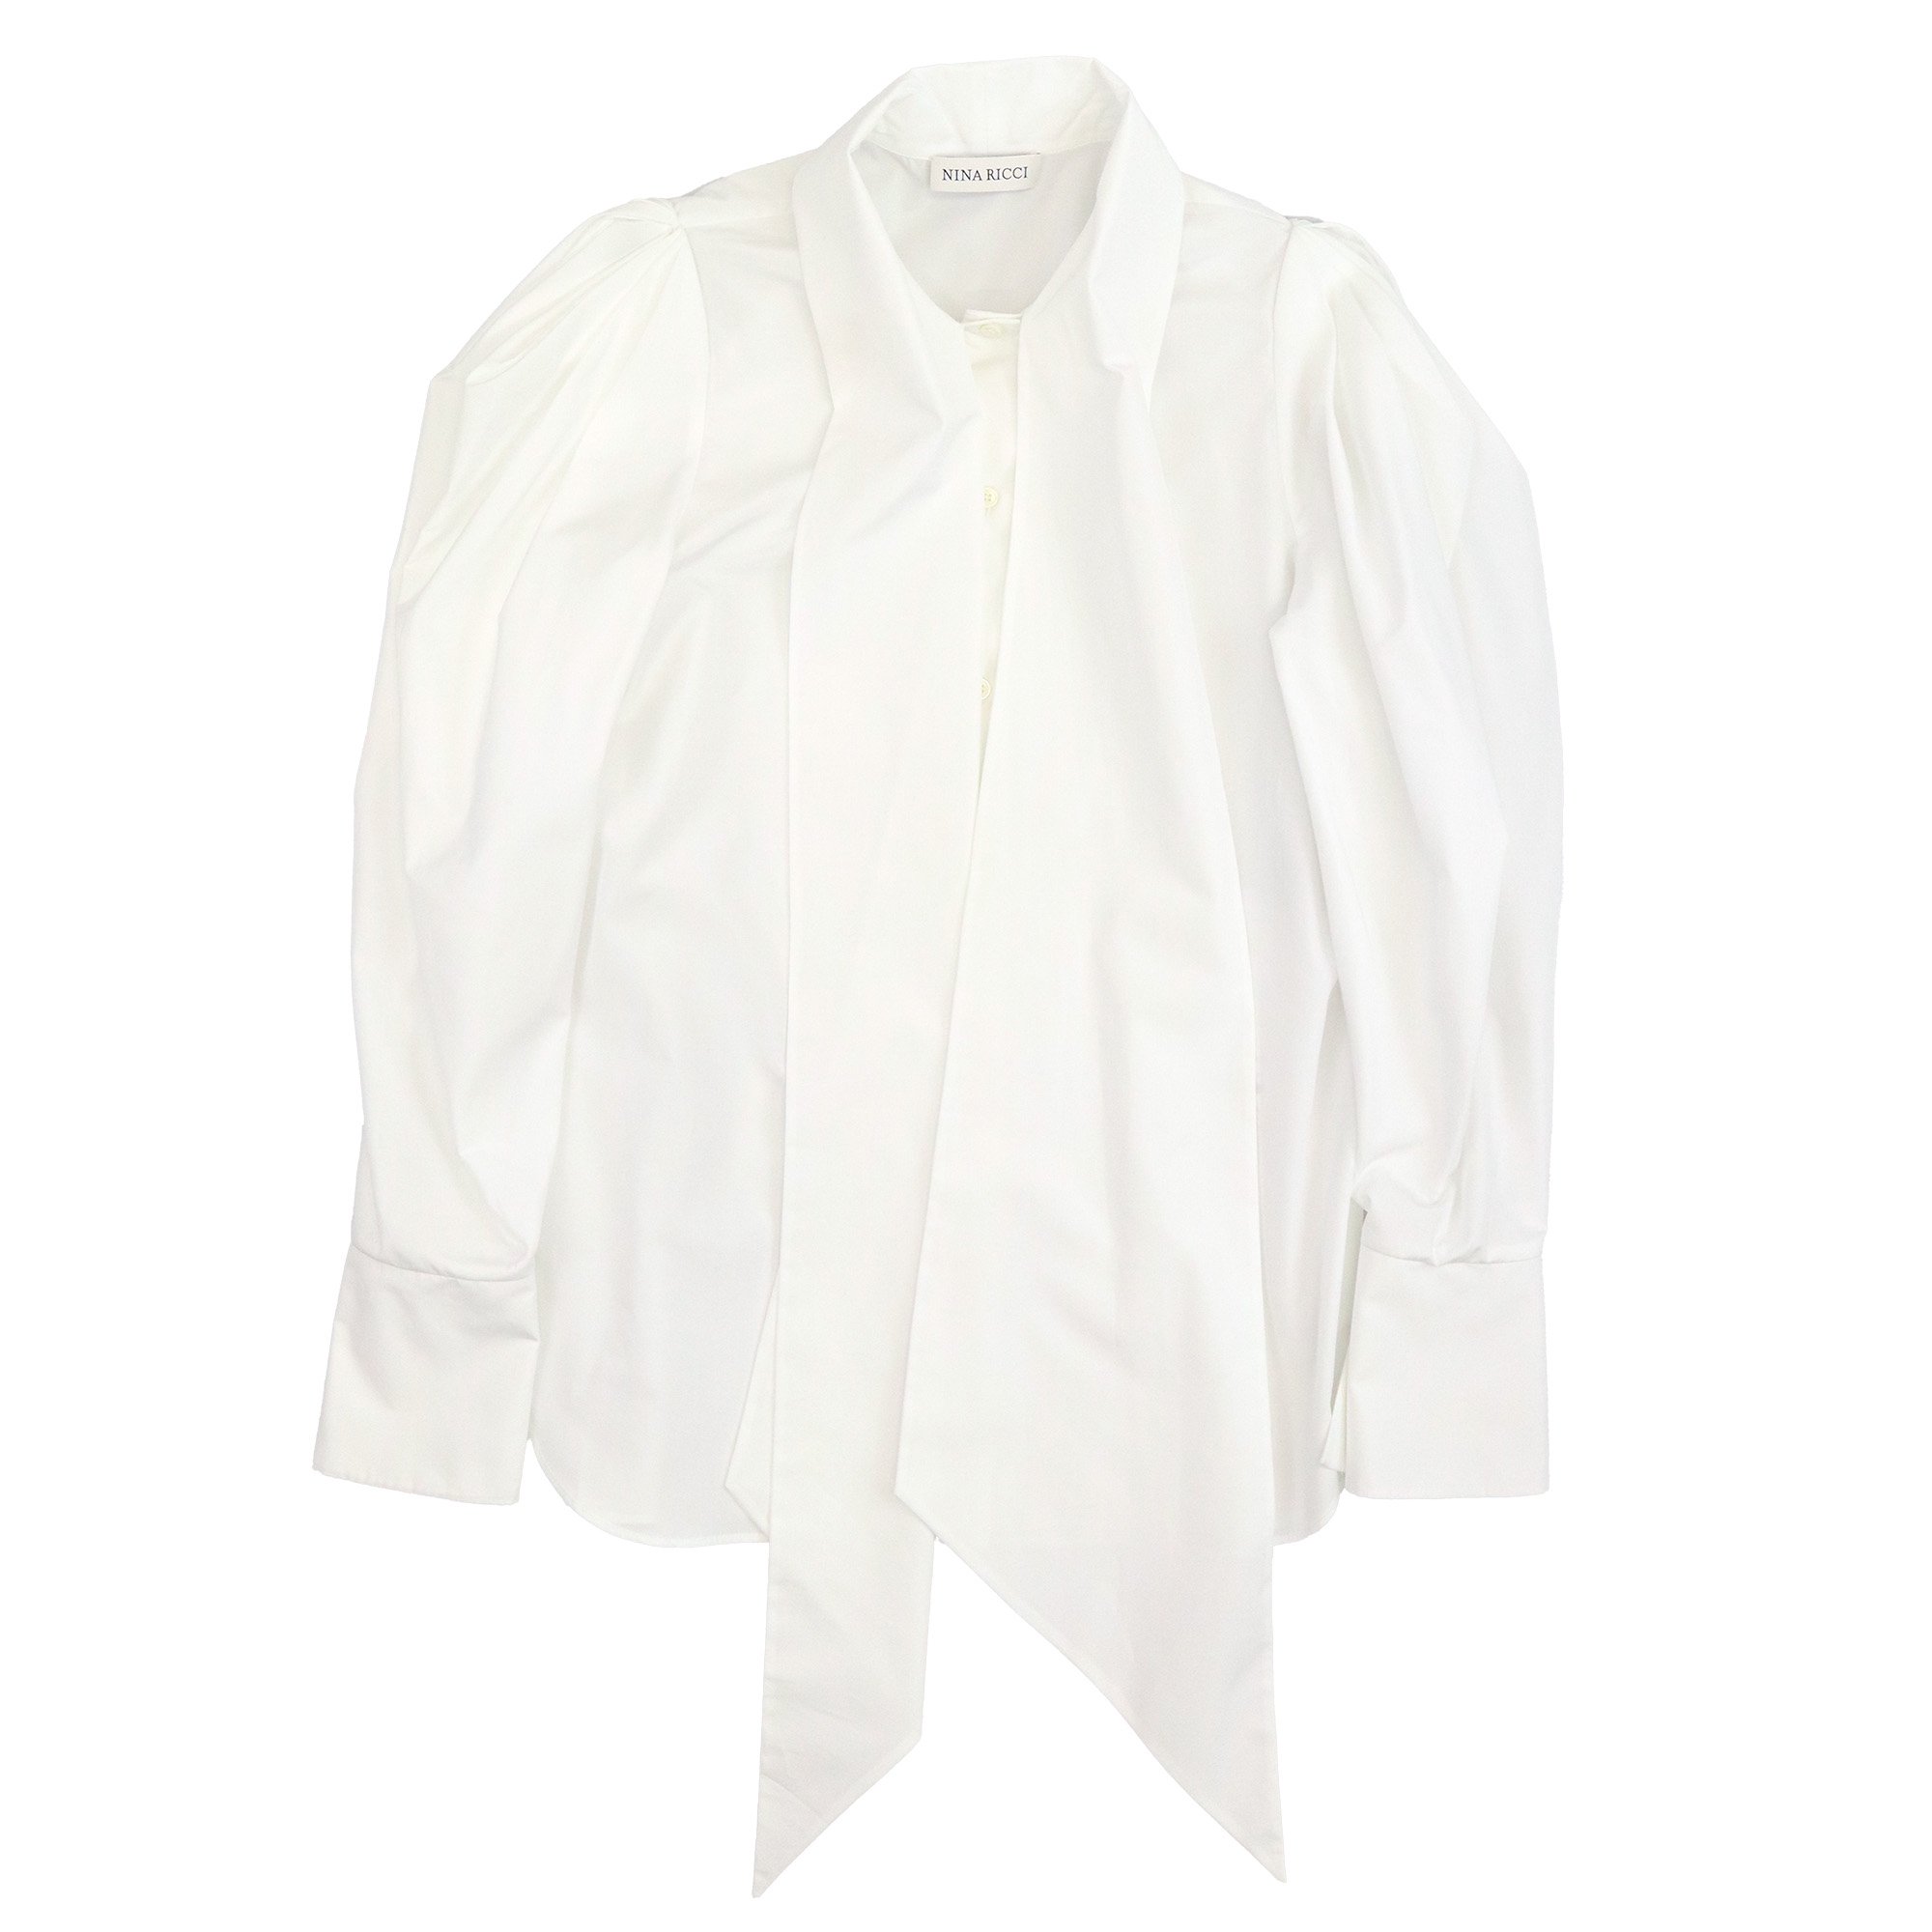 <img class='new_mark_img1' src='https://img.shop-pro.jp/img/new/icons7.gif' style='border:none;display:inline;margin:0px;padding:0px;width:auto;' />NINARICCI  L/S BLOUSE【WHITE】